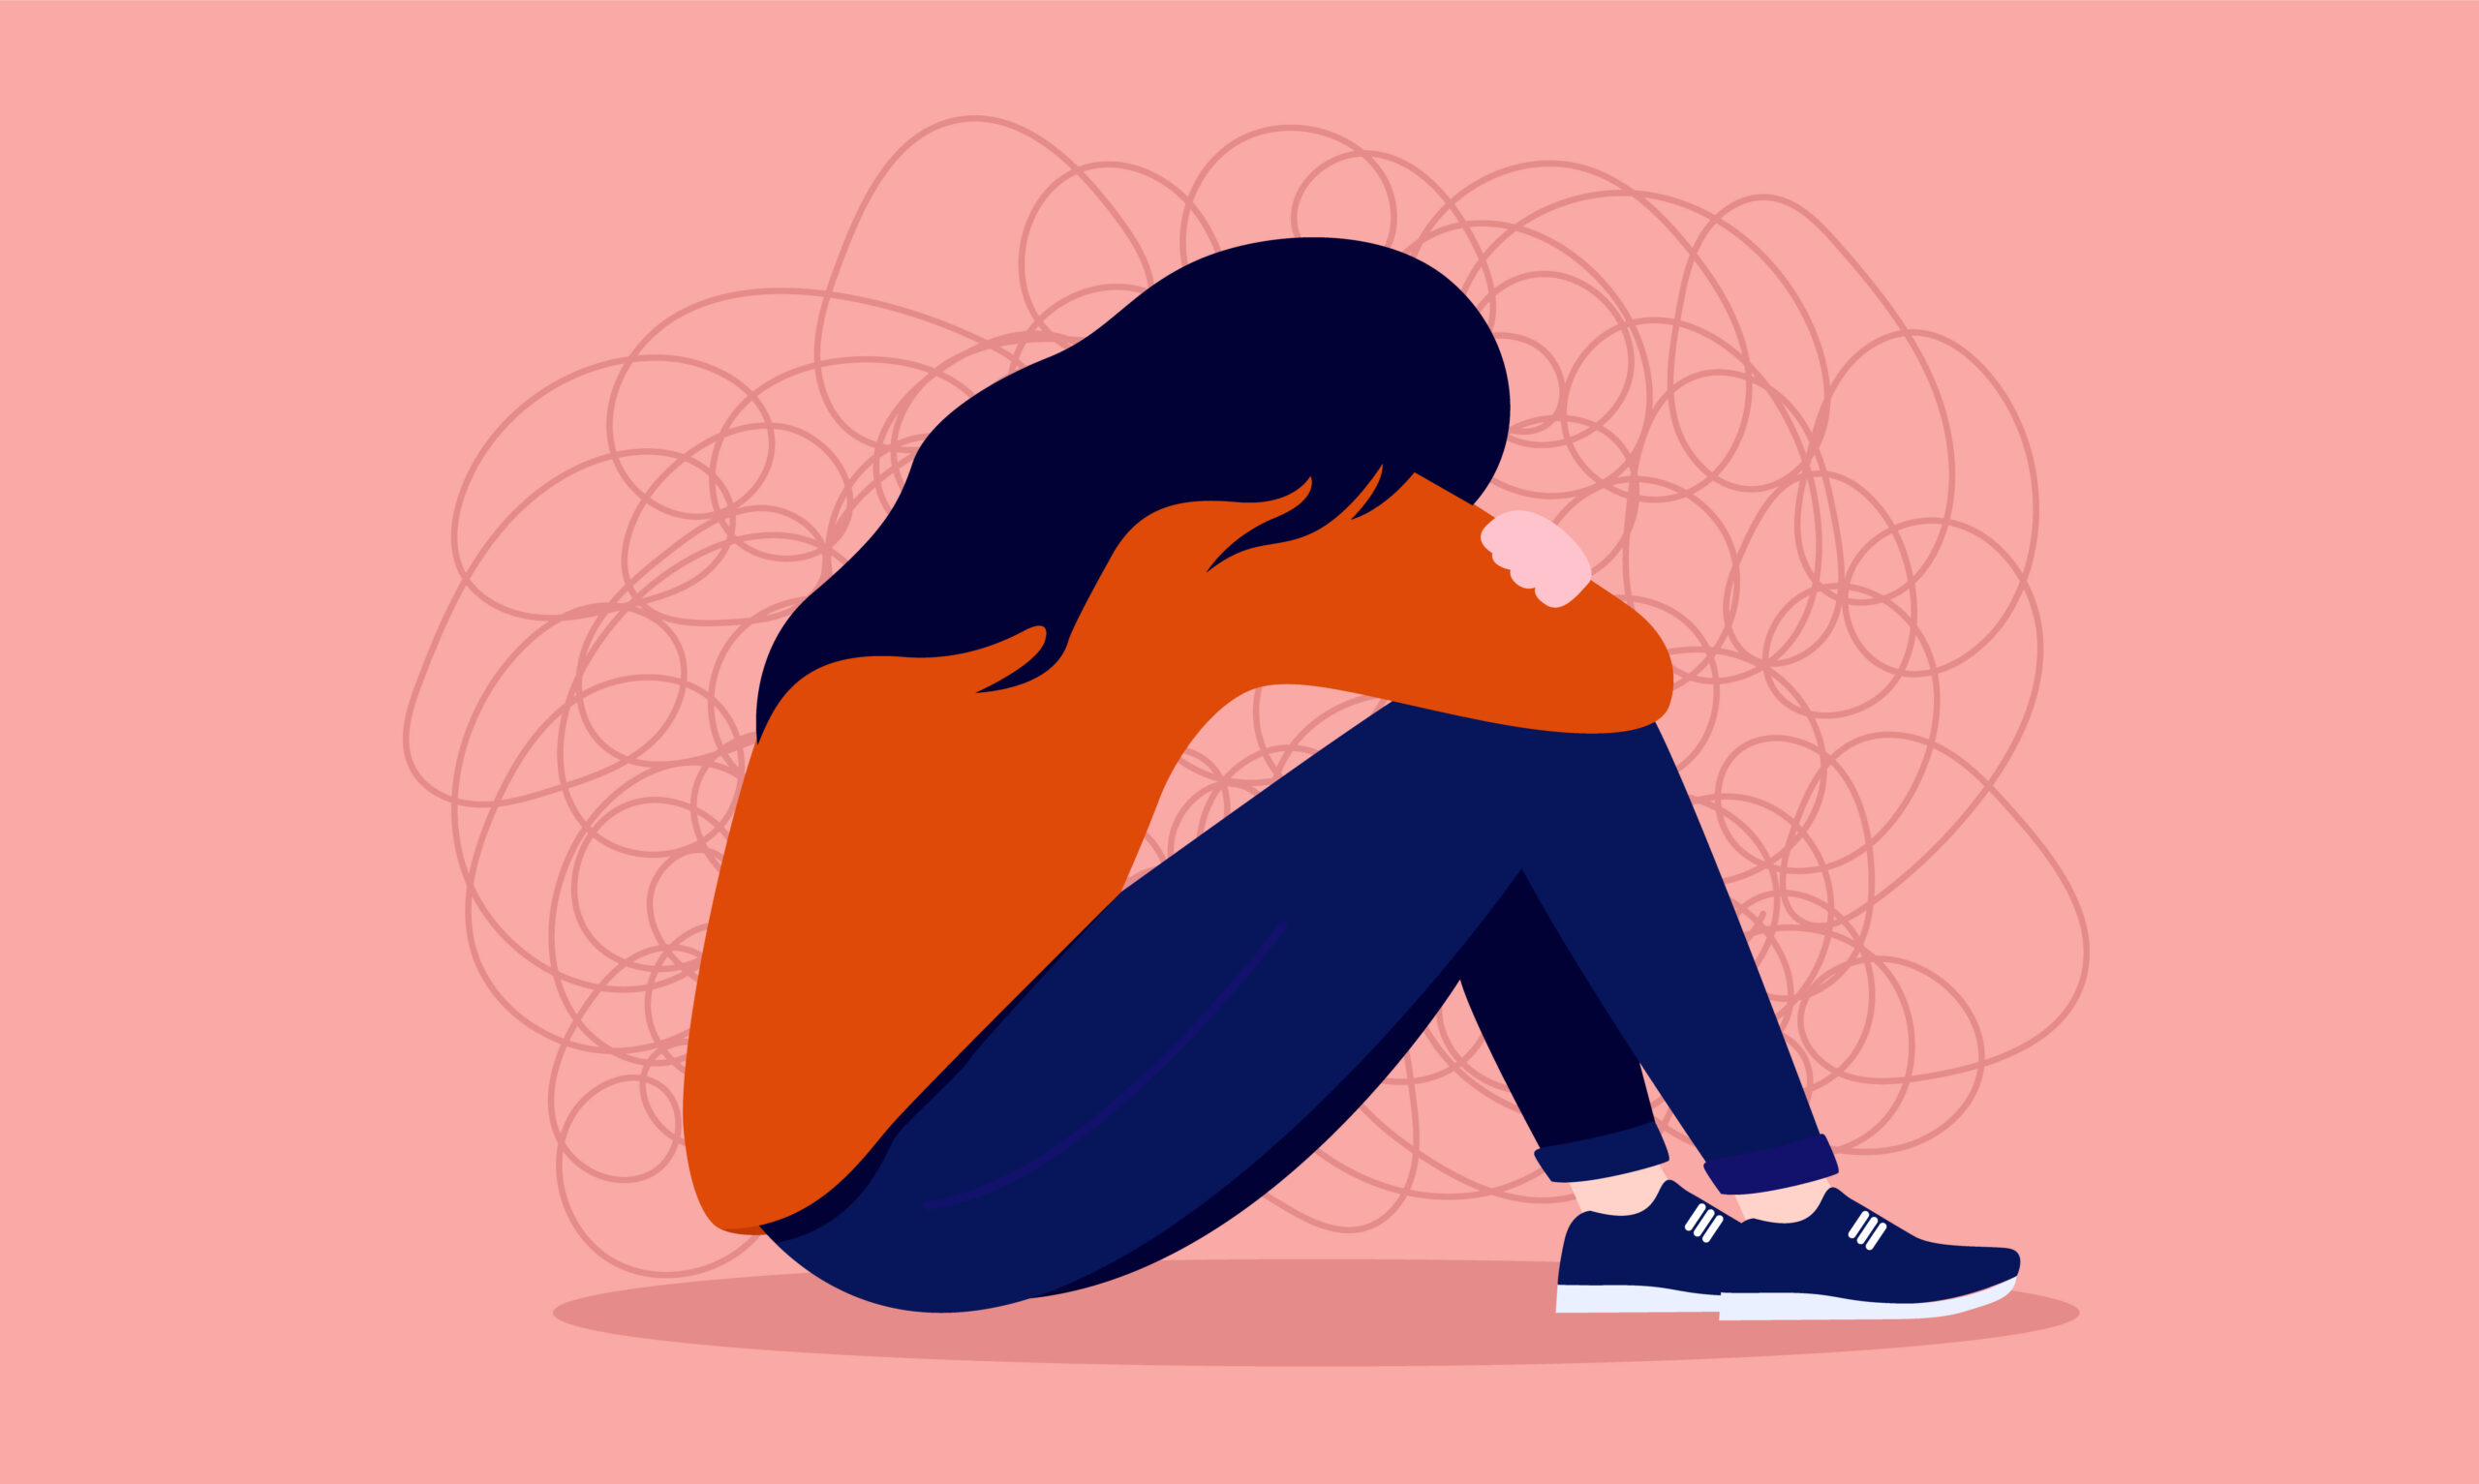 How can we tackle the teen mental health crisis?